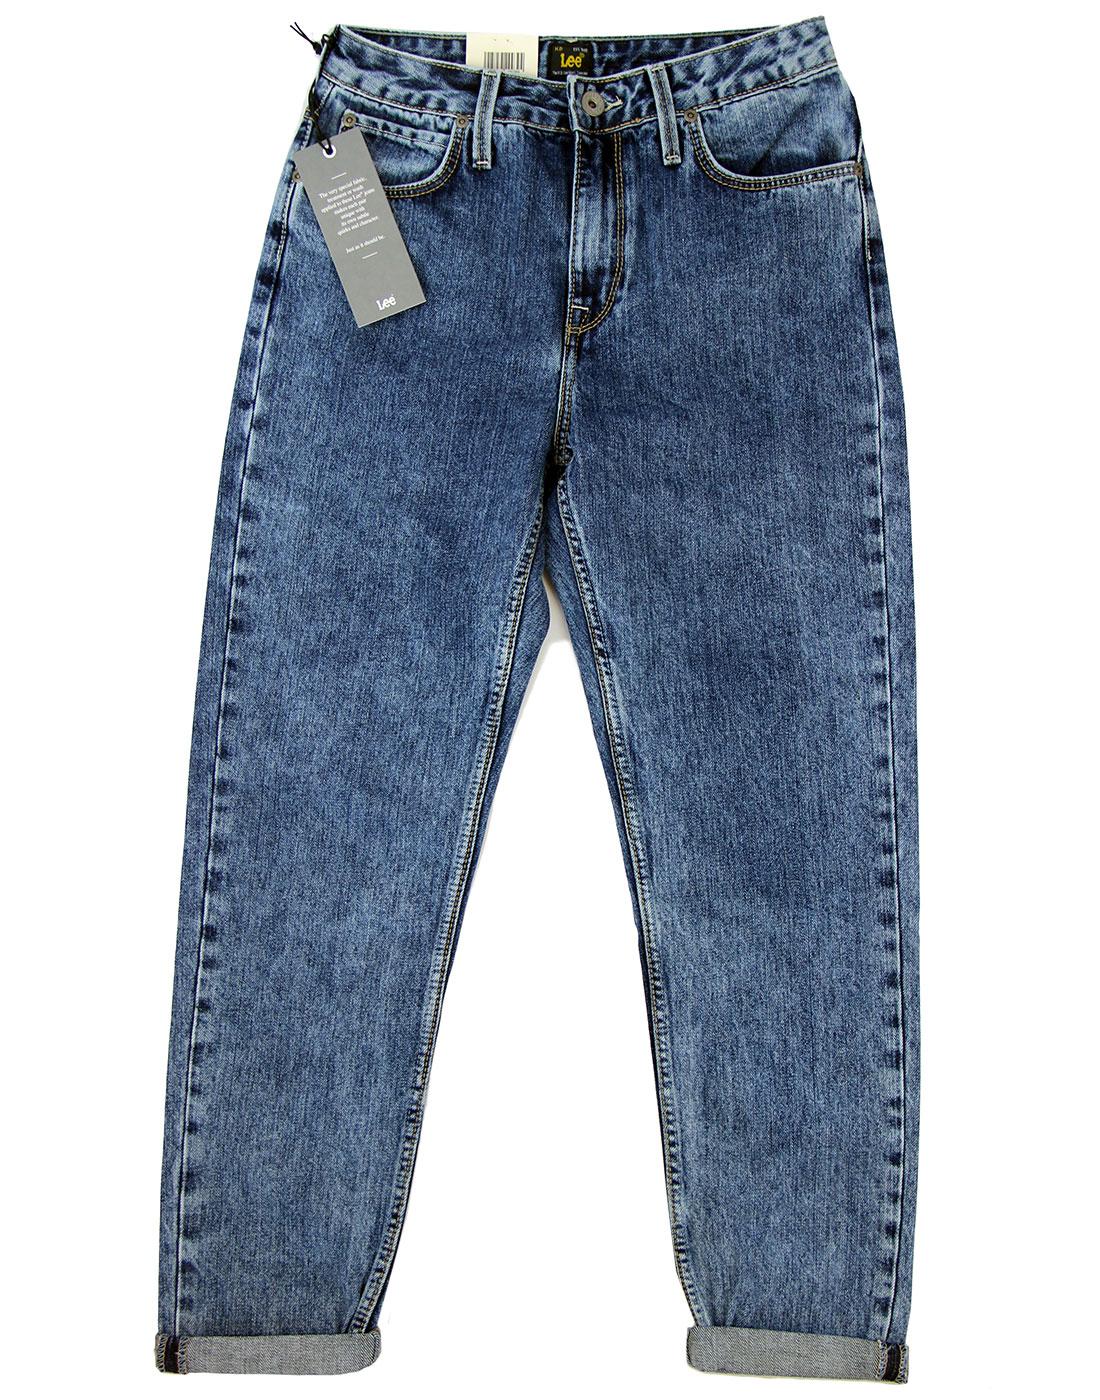 LEE Mom Jeans - Relaxed Tapered Fit Retro Jeans